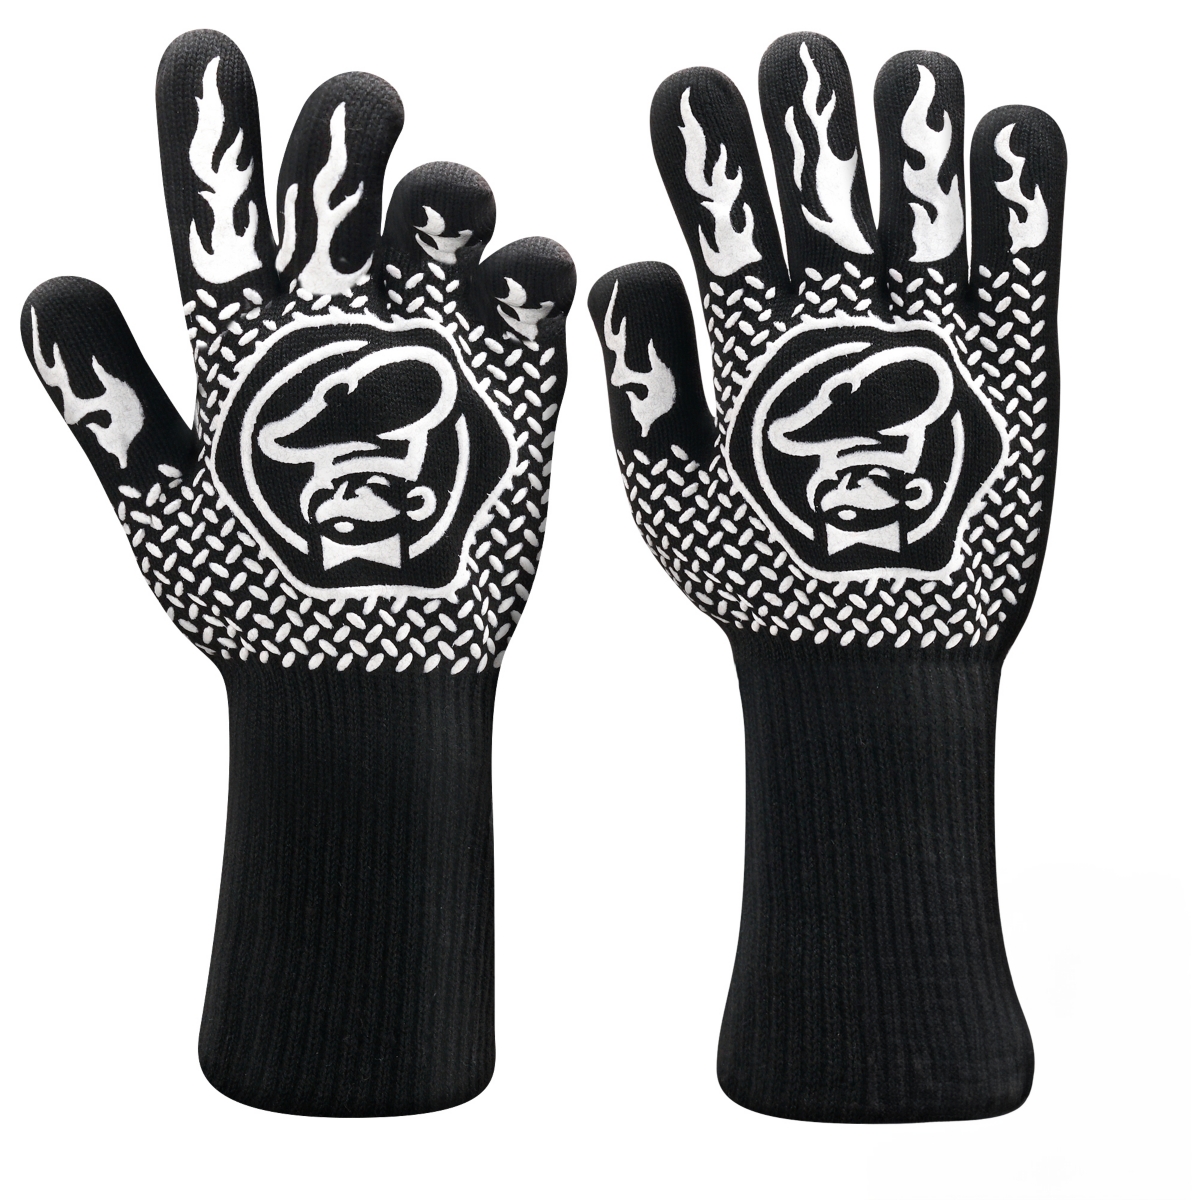 Heat Resistant Thick Aramid Fiber Oven Mitts with Non-Slip Grip - Resistant up to 1472Â°F - Black